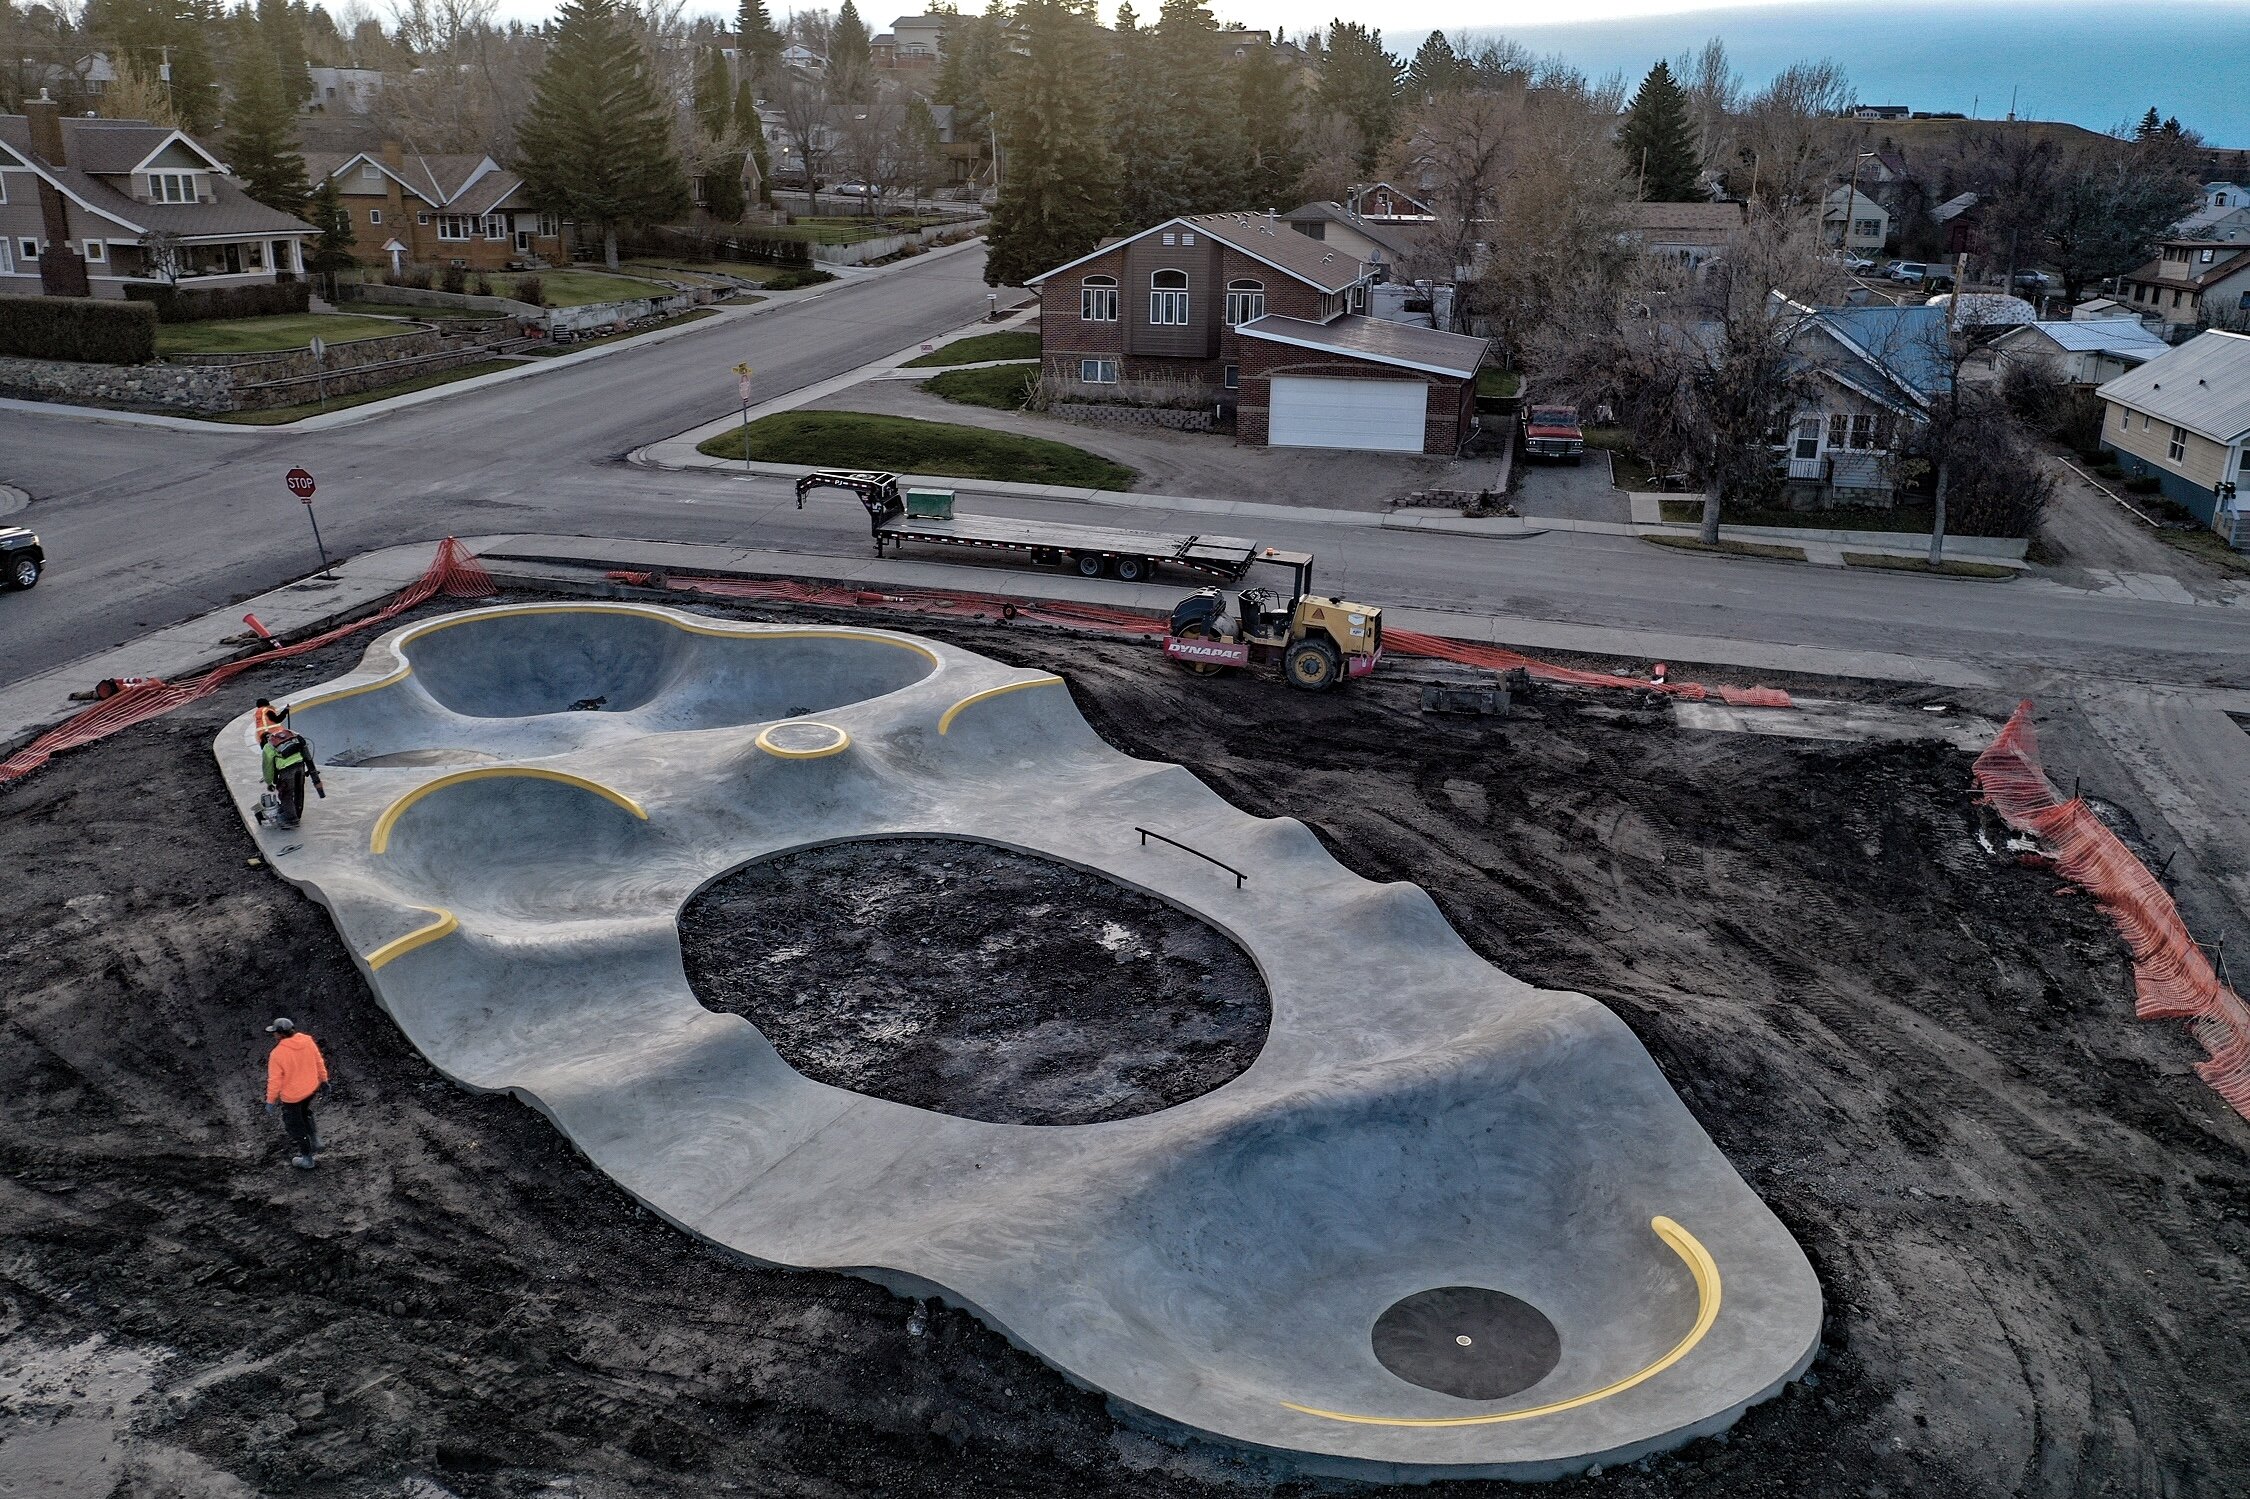 There’s nothing like a fresh new park 💥 Heavenly #skatespots dot the #middleofnowhere ✨ New Montana landscapes courtesy of Montana Pool Service &amp; MT Skatepark Association 